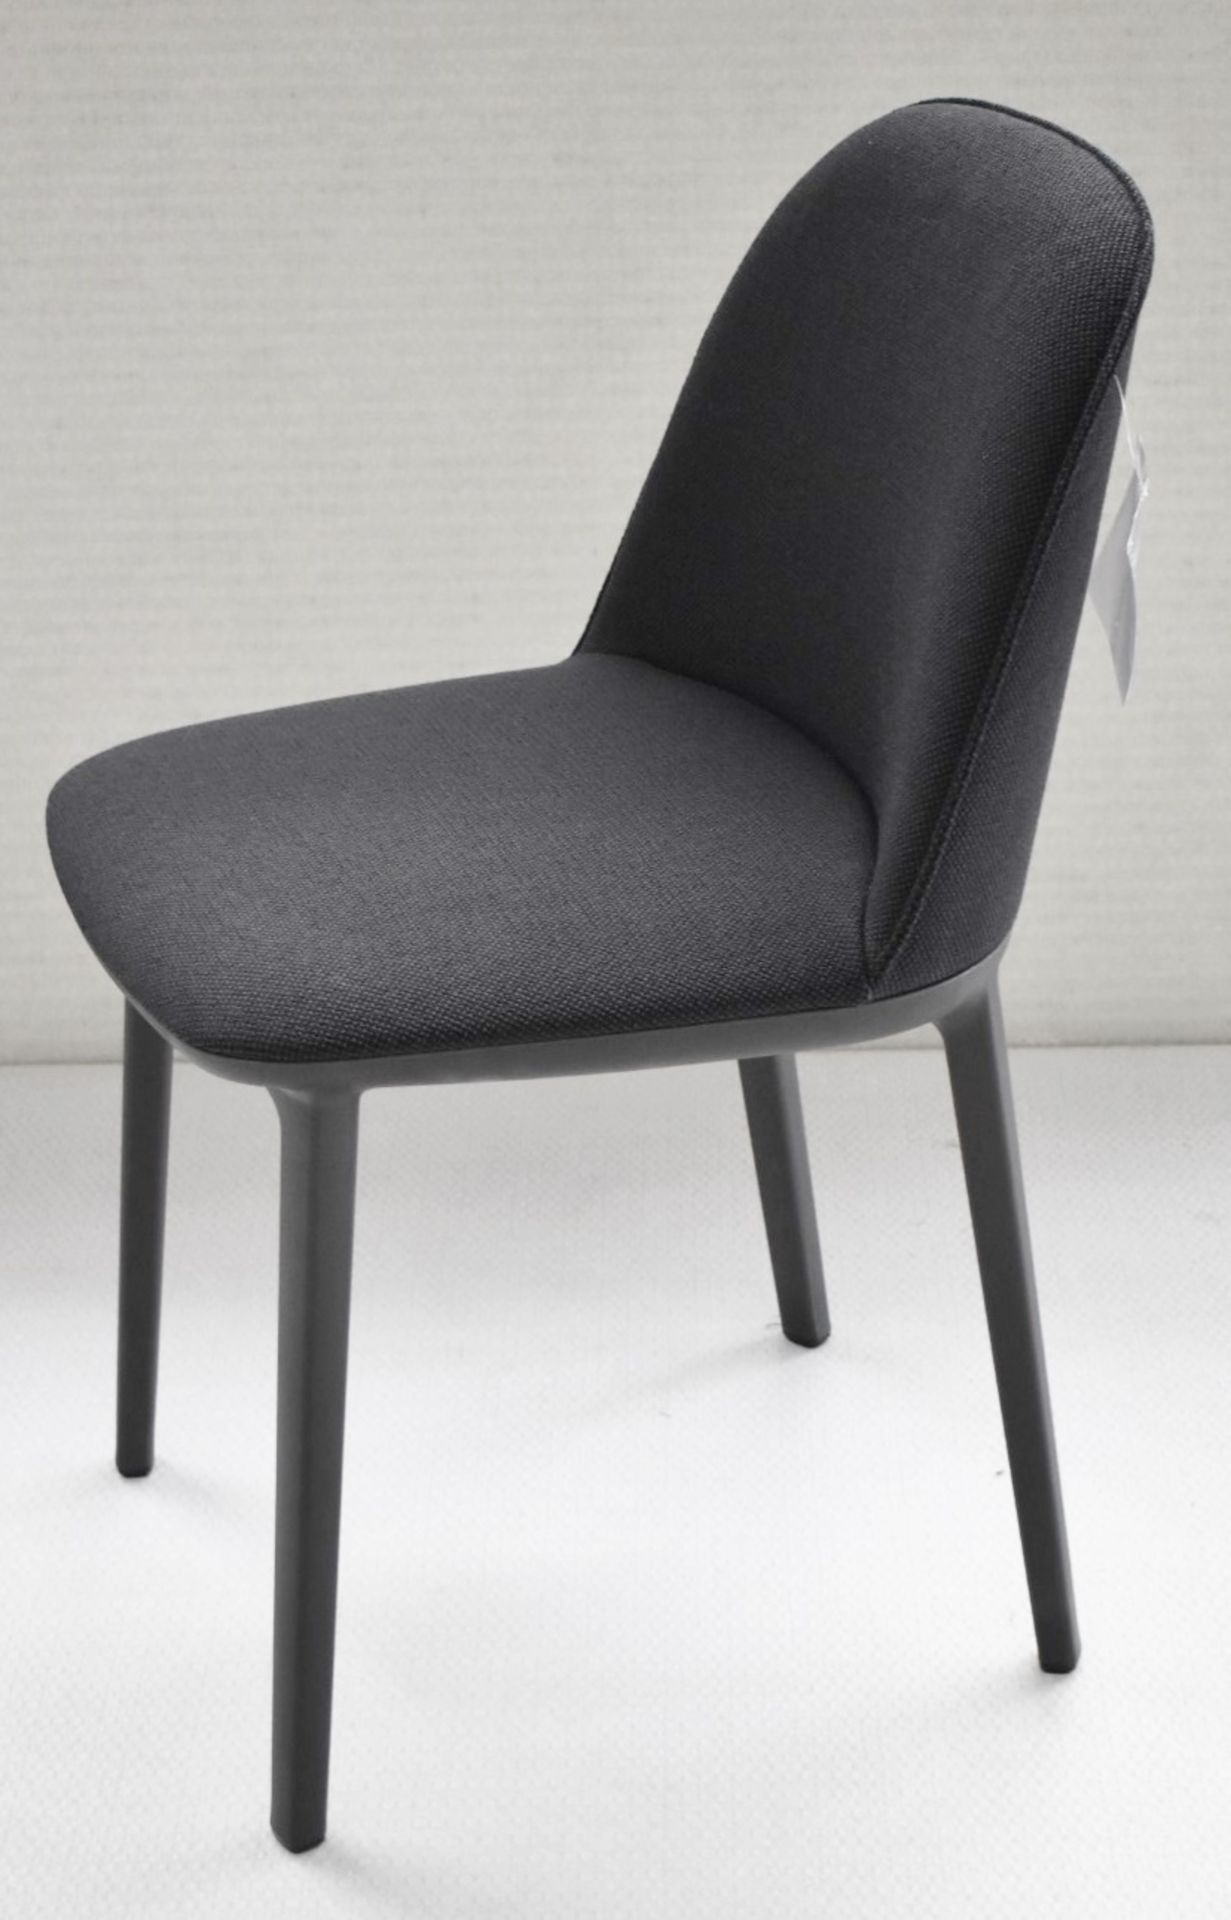 1 x VITRA Softshell Designer Chair With Padded Seat, In Anthracite Black / Grey - Original Price £80 - Image 4 of 5